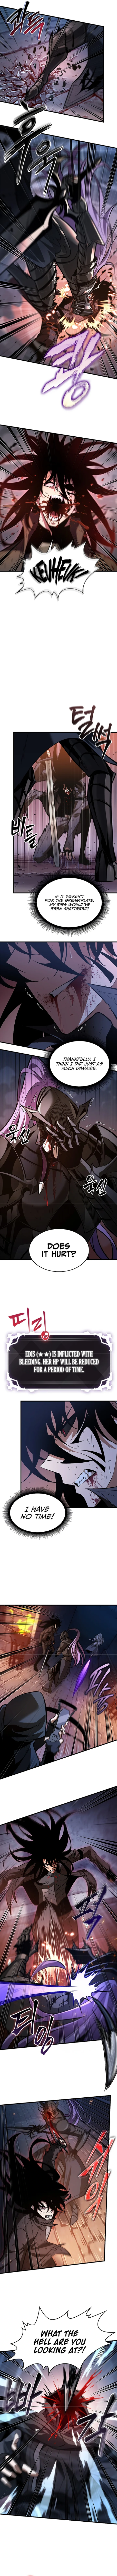 Pick Me Up - Chapter 54 Page 2